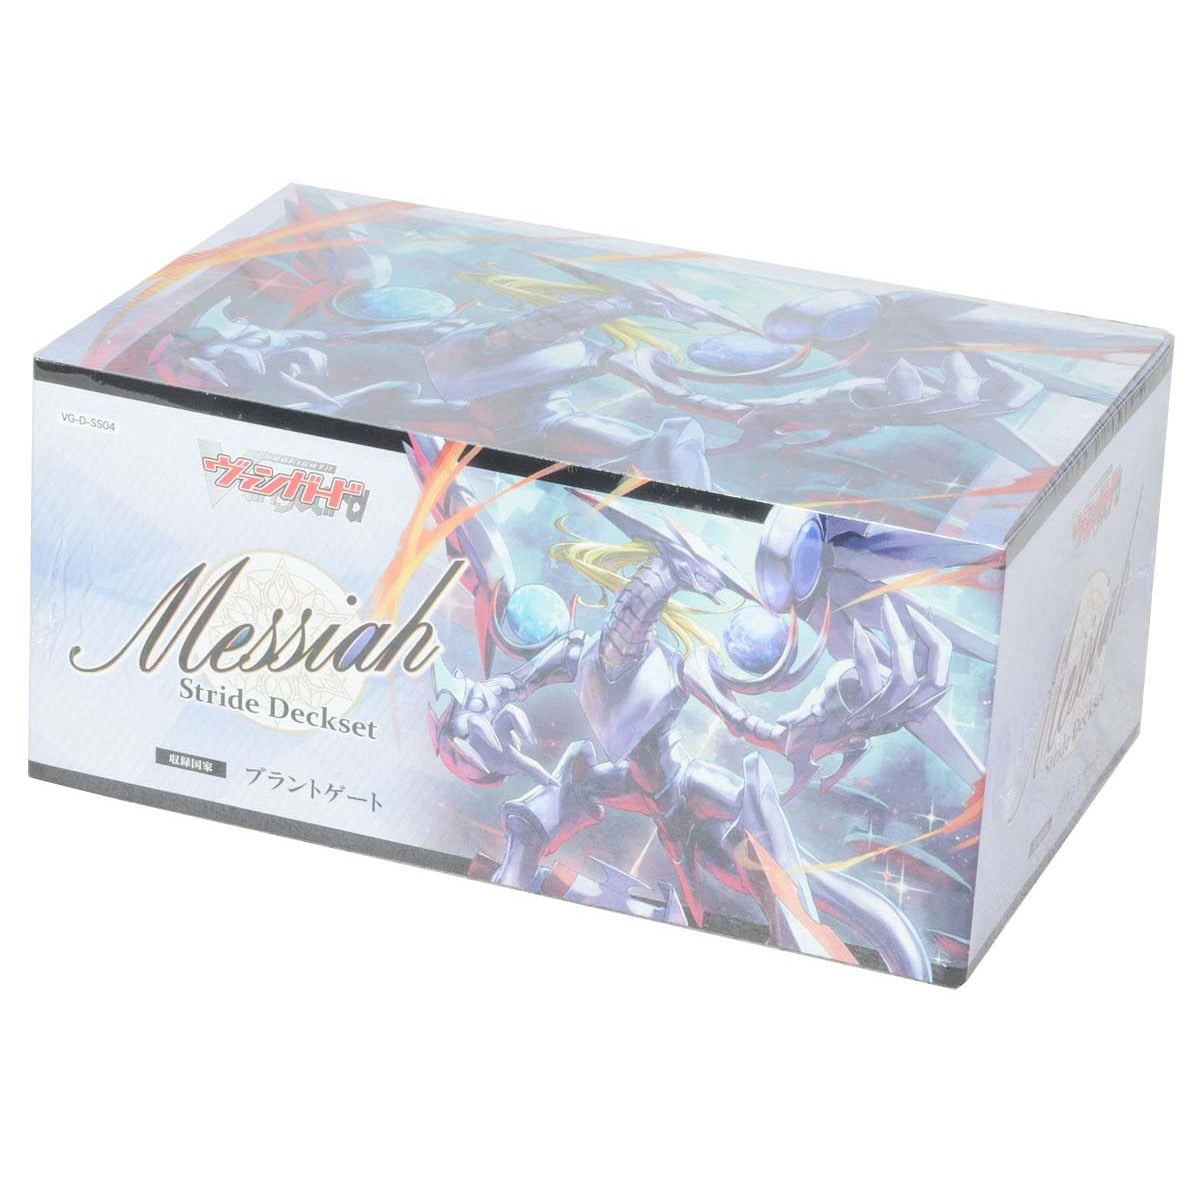 Cardfight!! Vanguard OverDress Special Series Vol. 4 "Stride Deckset Messiah" [VG-D-SS04] (Japanese)-Bushiroad-Ace Cards & Collectibles